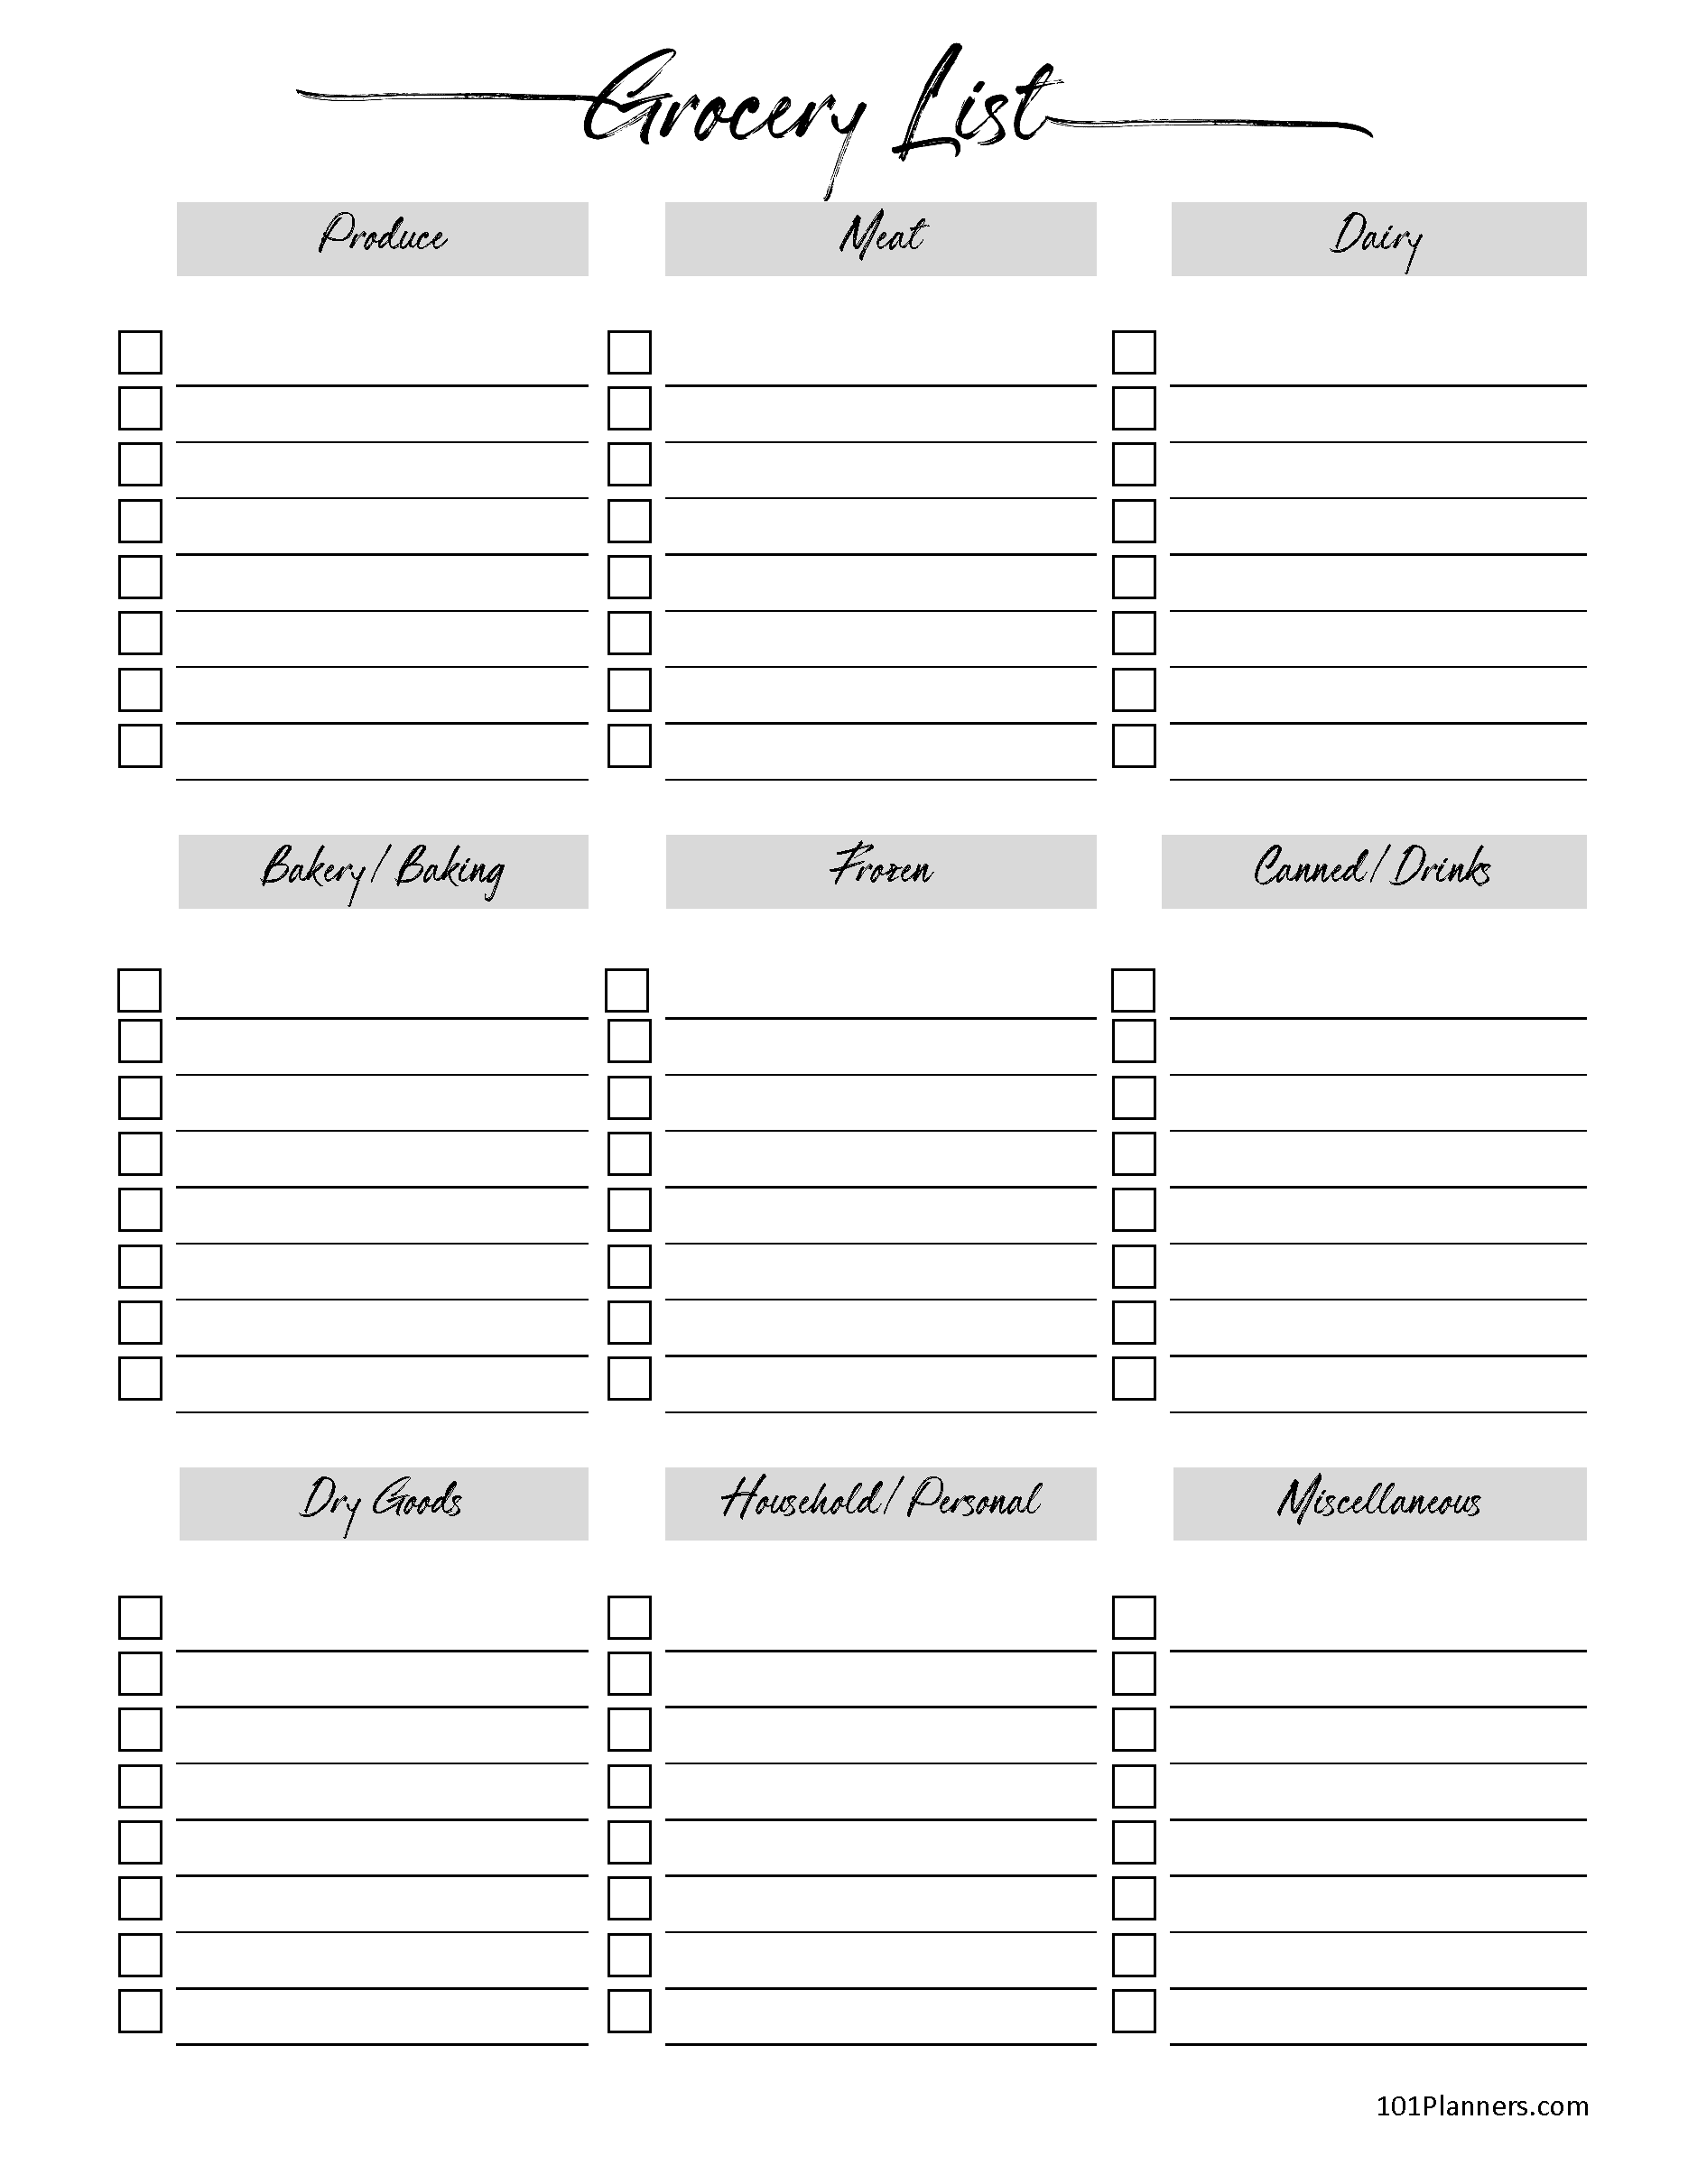 Grocery List - Free Printable! - One Beautiful Home